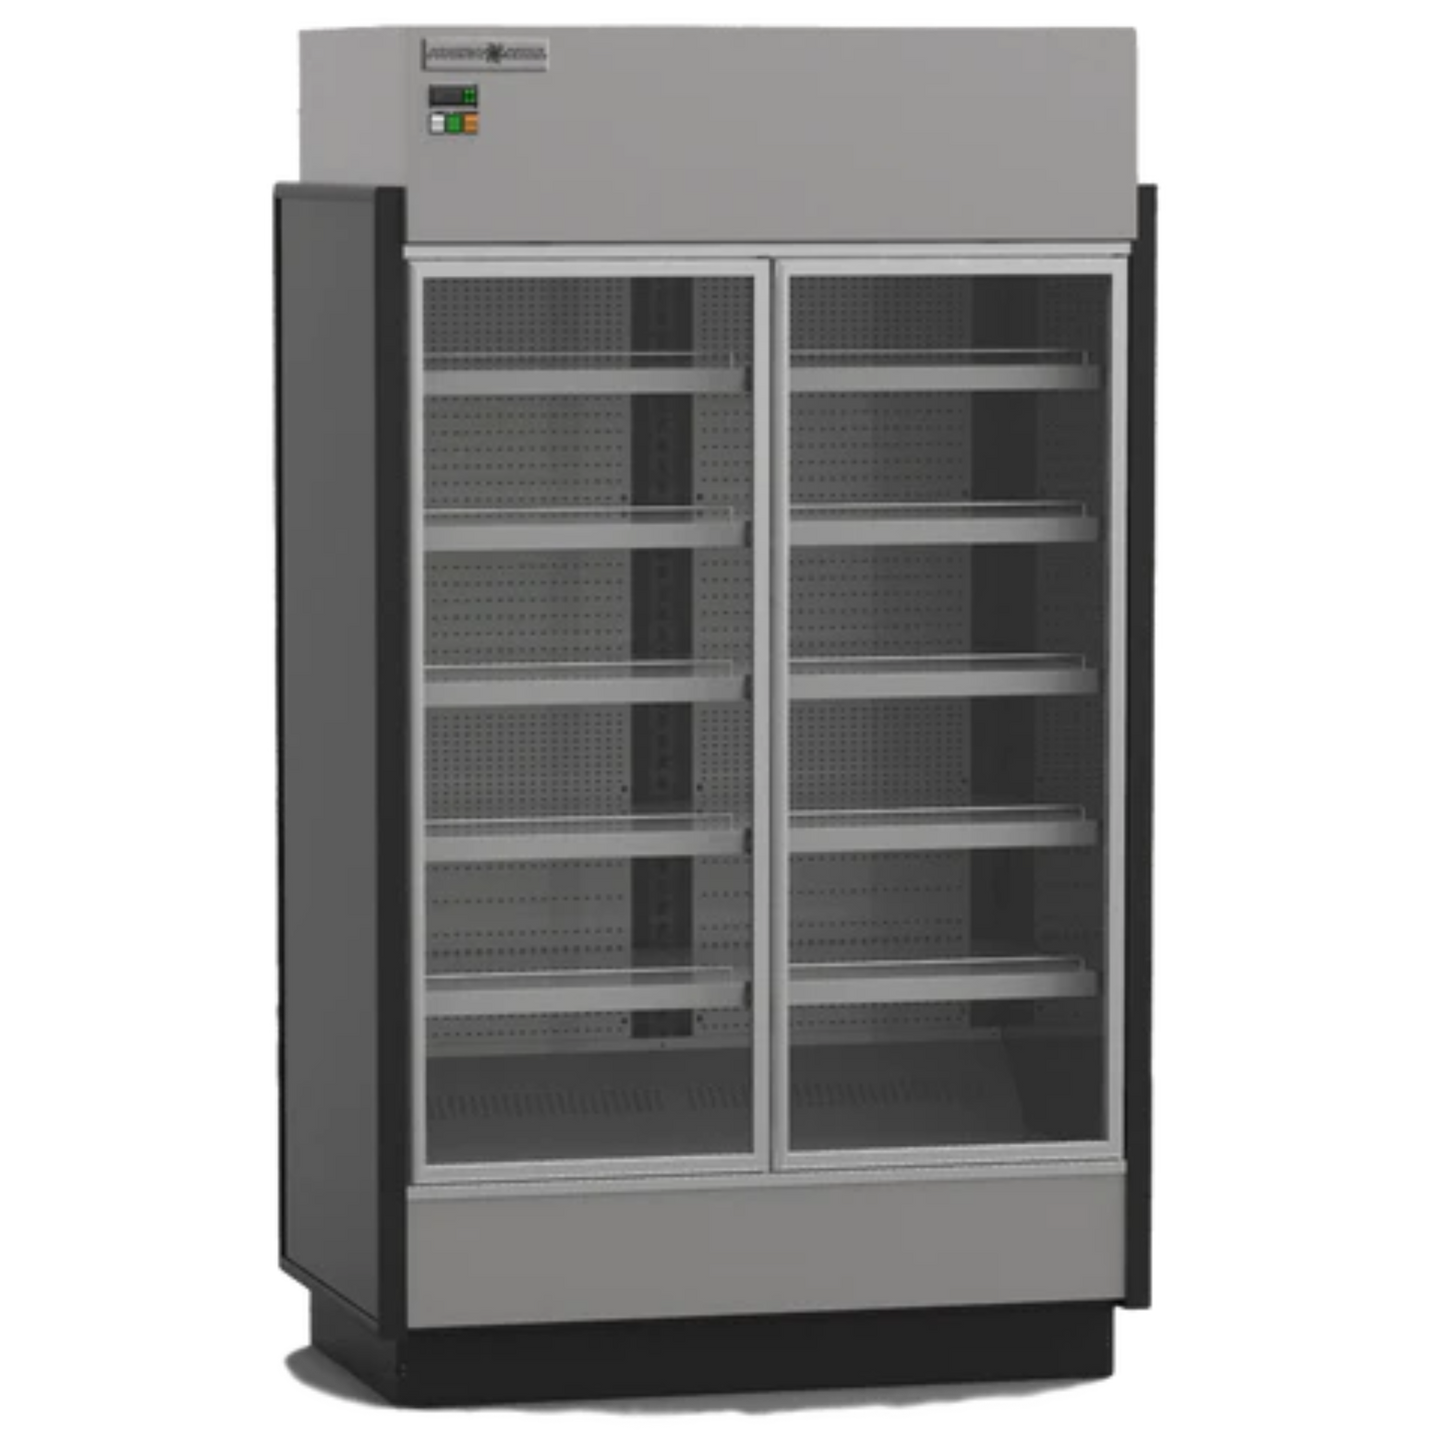 Hydra-Kool KGV-MR-2-S 2-Door High Volume Grab And Go Self-Contained